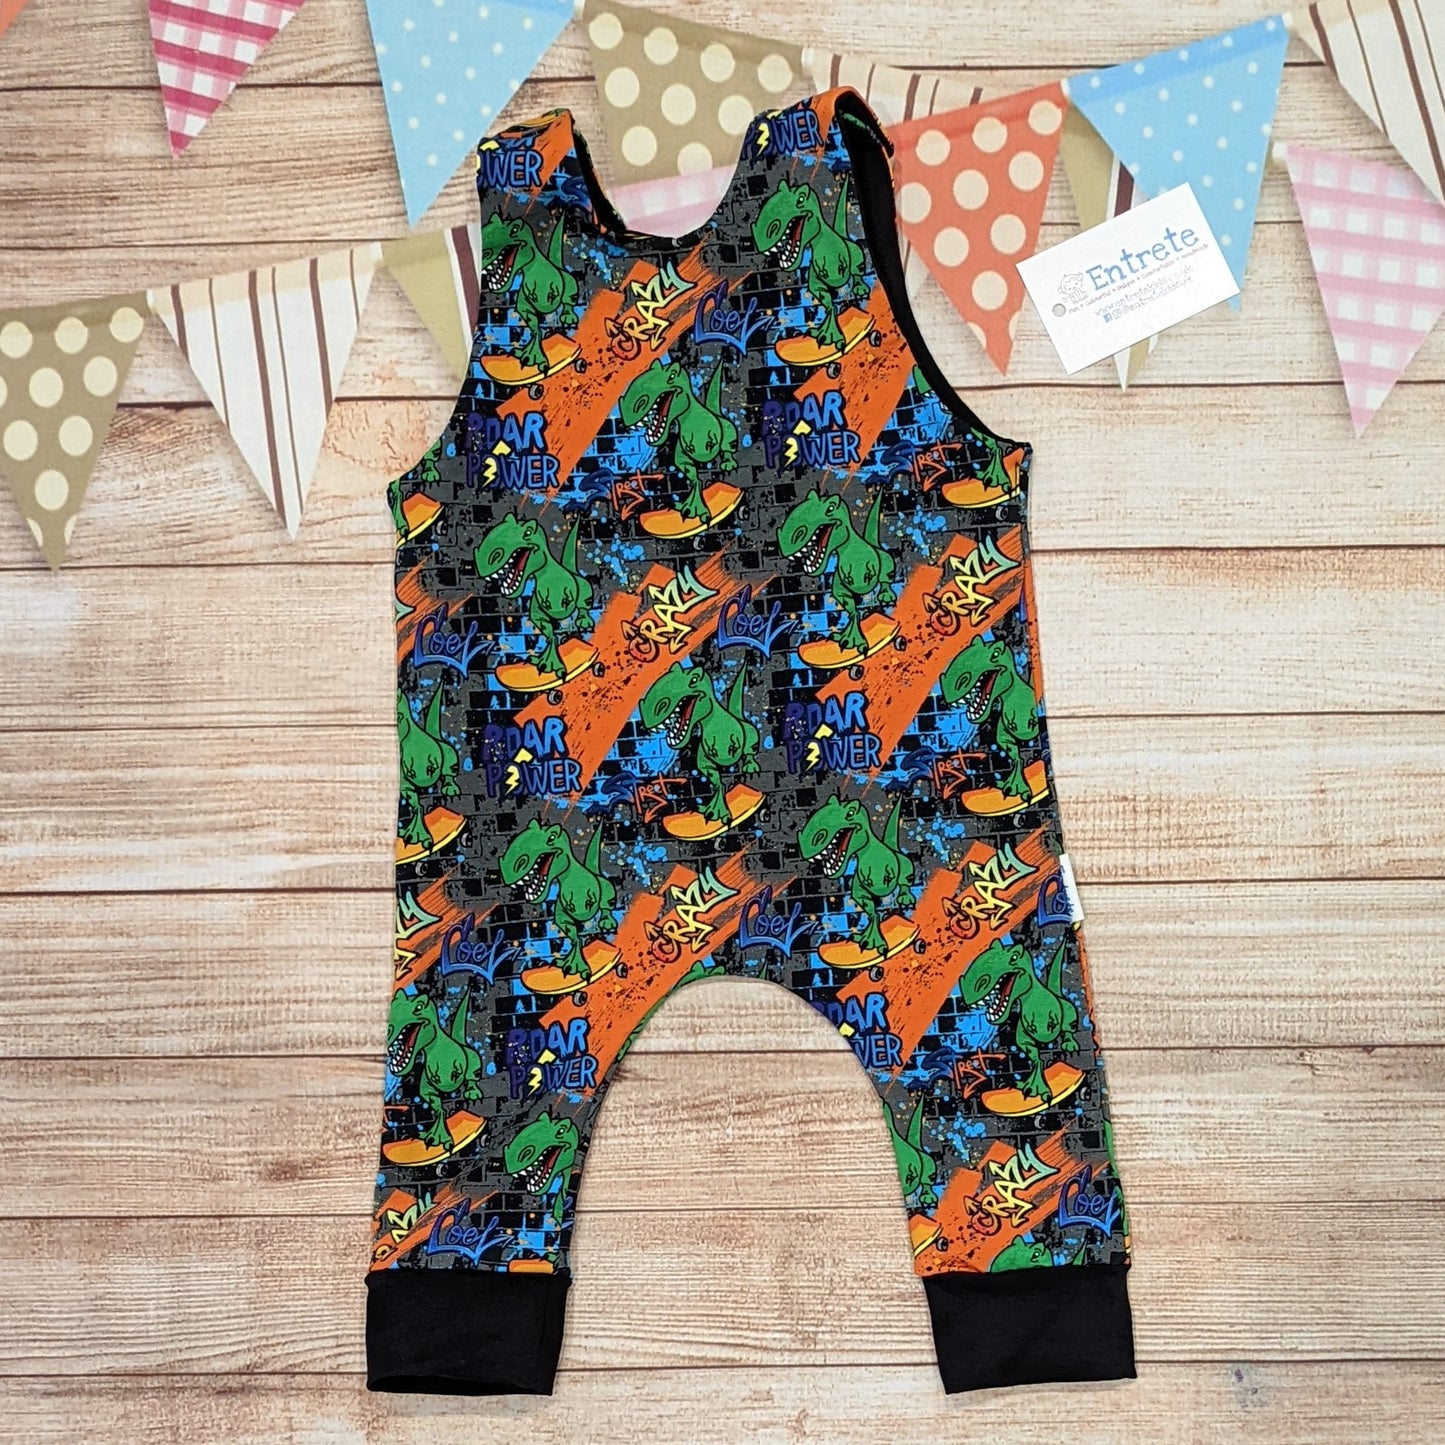 The insanely fun skateboarding dinosaurs romper. Handmade using street dino cotton French terry and black cotton jersey. Shown from the rear.